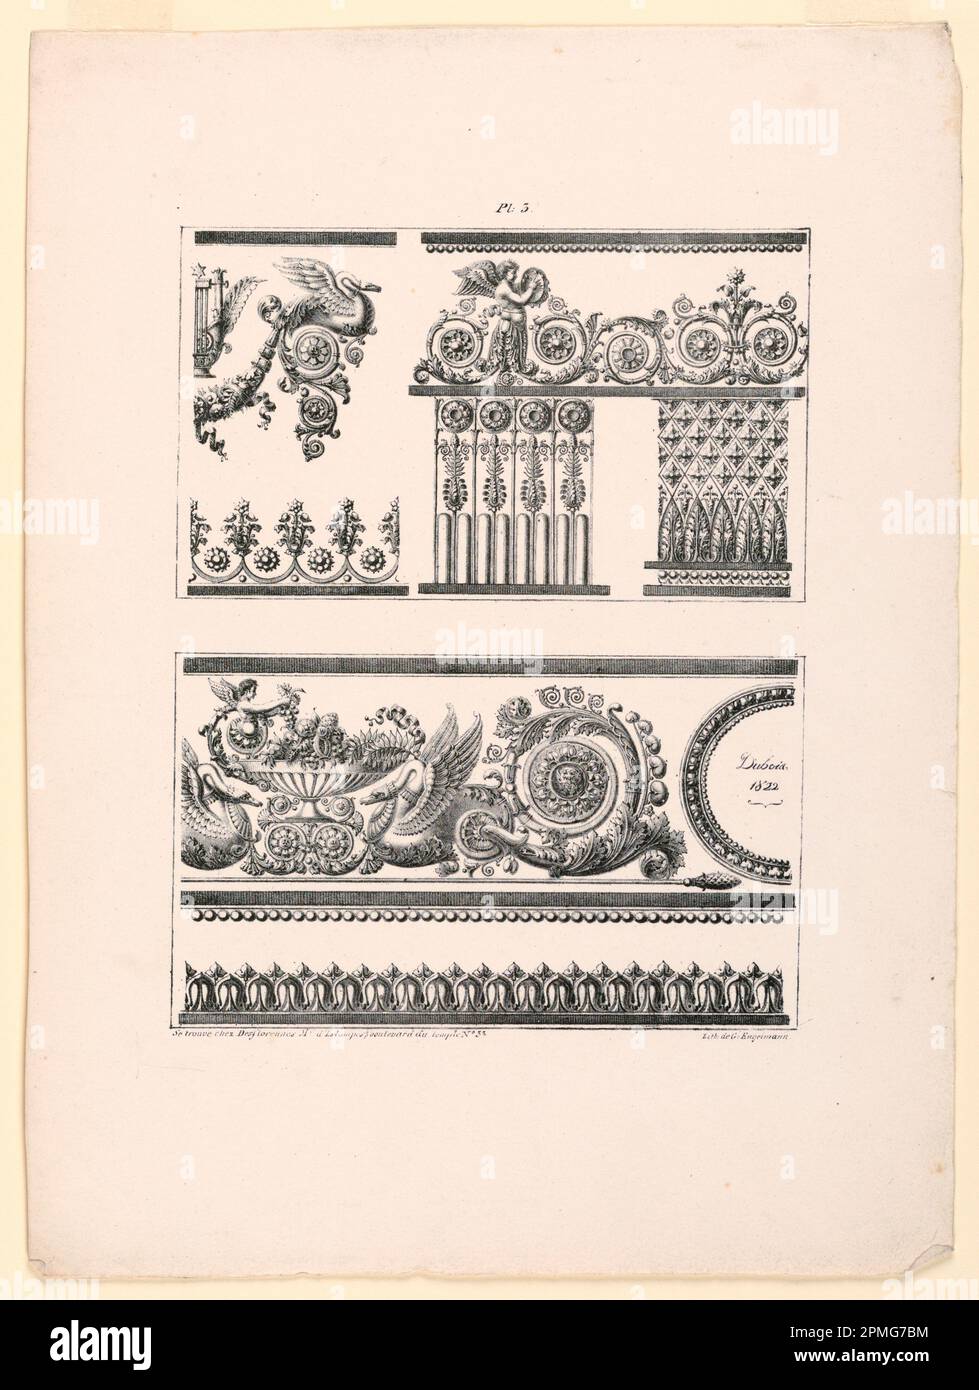 Print, Frieze and Ornamental Bor; After Jean DuBois (French, ca. 1750 – after 1801); Printed by Gottfried Engelmann (1788 – 1839); Published by Desflorennes; France; lithograph support: white wove paper; 35.9 x 26.9 cm (14 1/8 x 10 9/16 in.) Platemark/repeat: 24.5 x 18.7 cm (9 5/8 x 7 3/8 in.) Mat: 45.7 x 35.6 cm (18 x 14 in.) Stock Photo